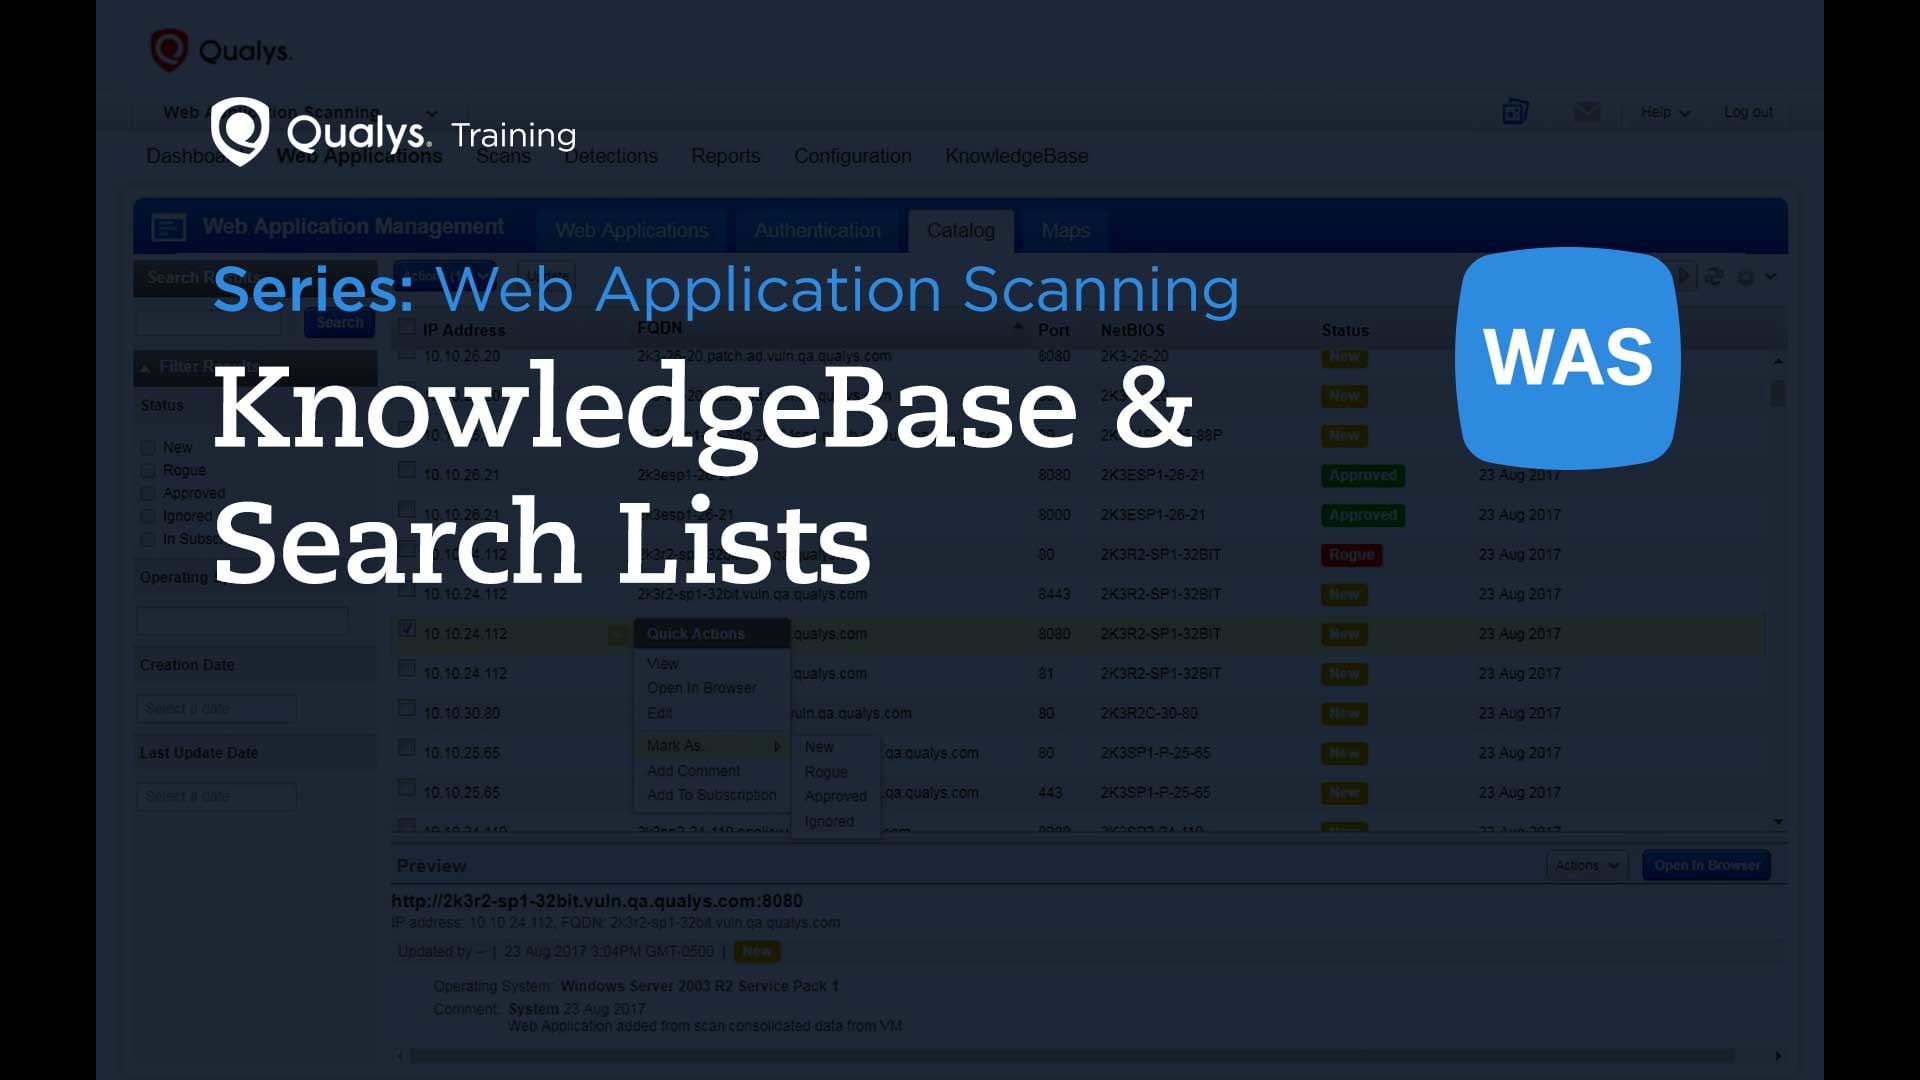 KnowledgeBase & Search Lists